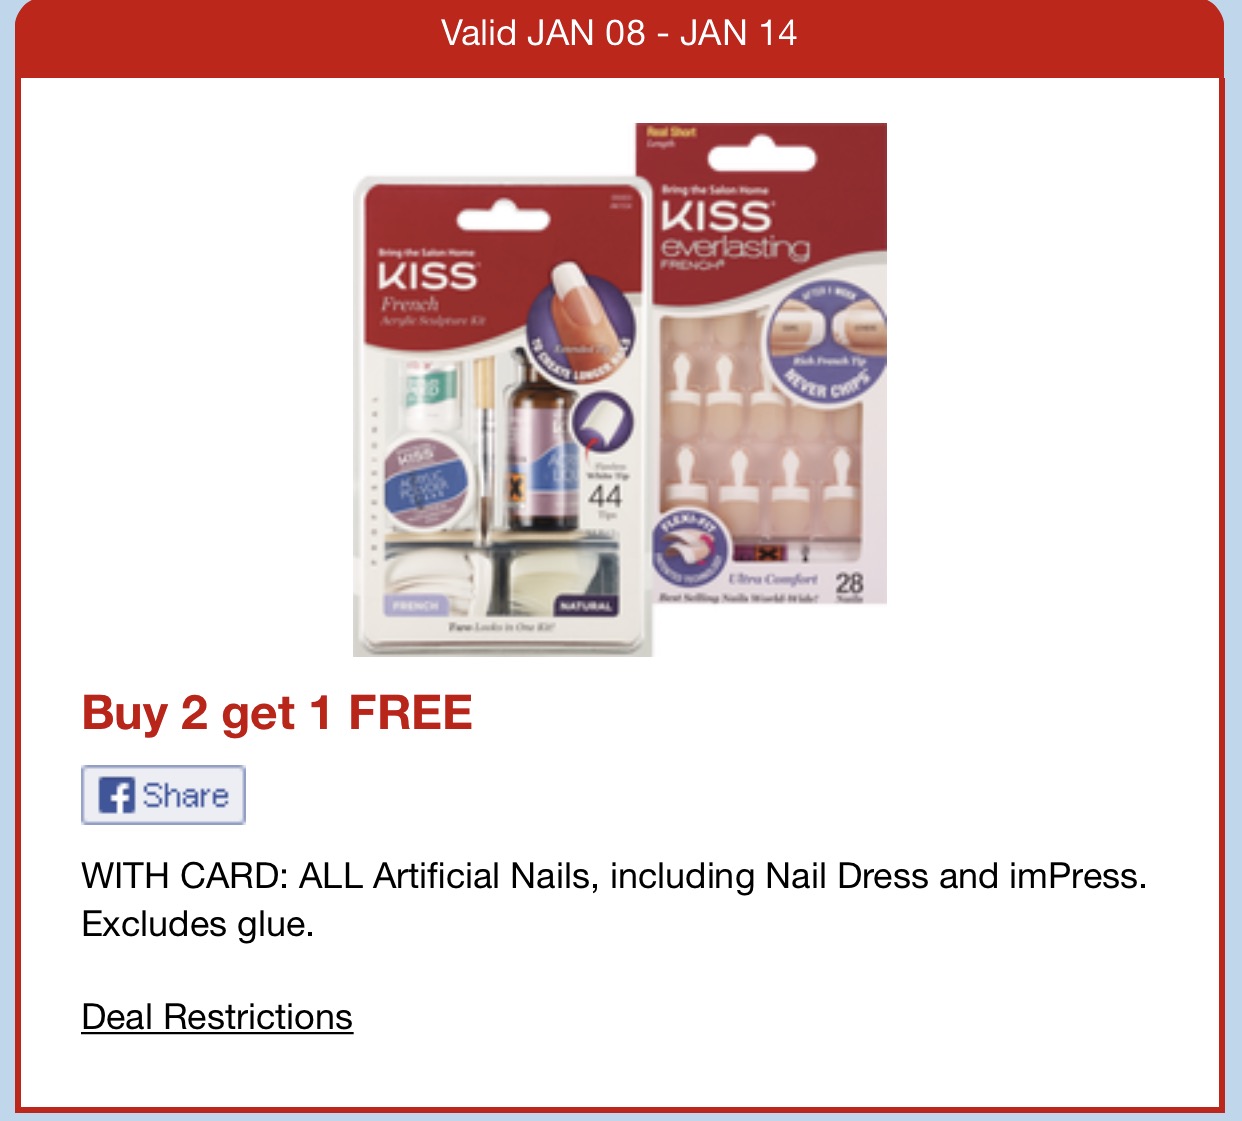 Swatch That: CVS Beauty Deals - Valid from January 8 to January 14, 2017